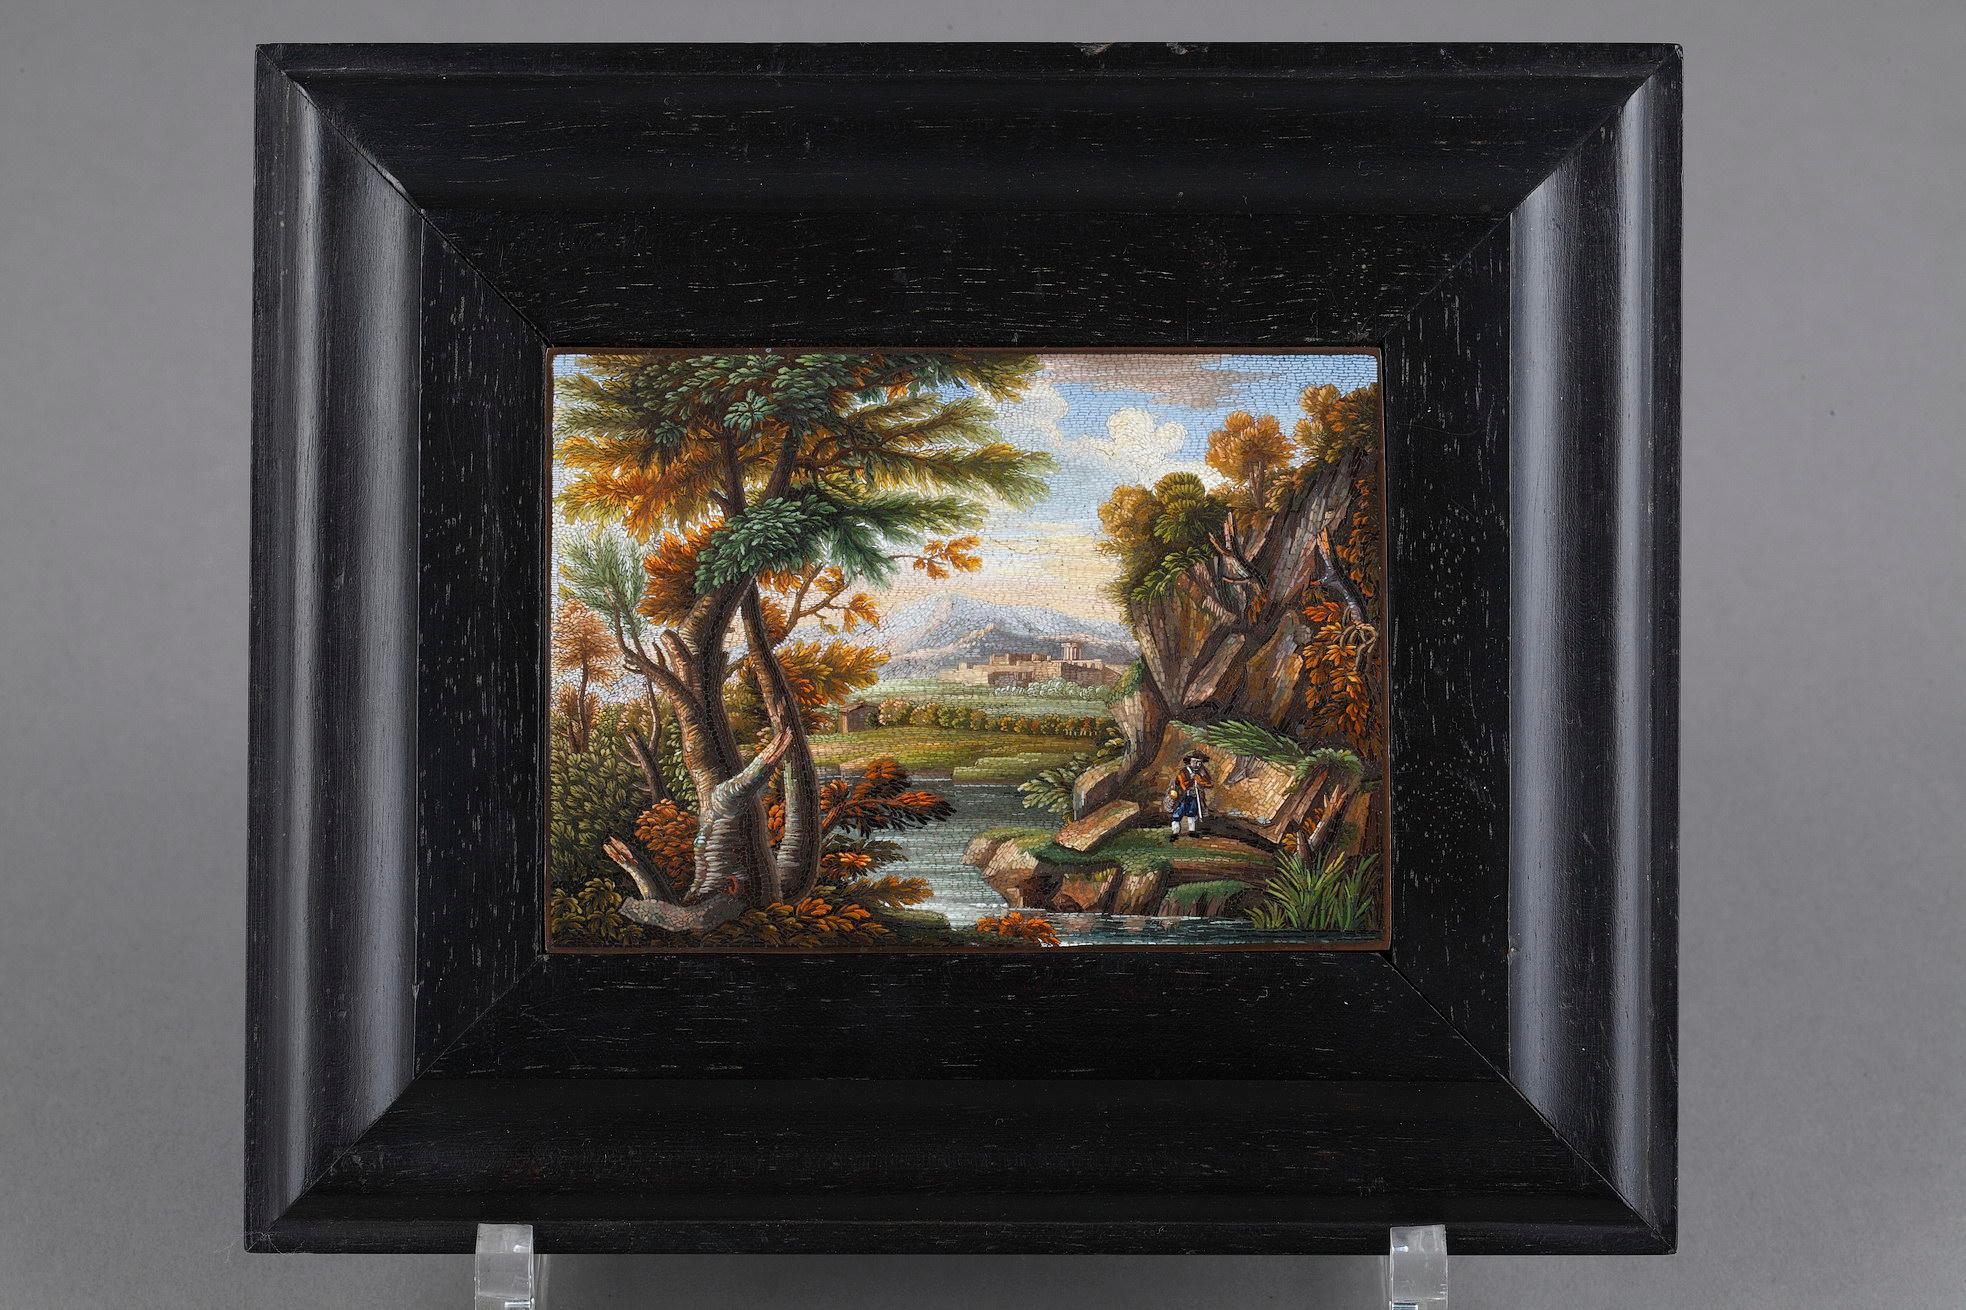 A rectangular micromosaic plate representing a river landscape. This plaque depicting a river on whose left bank is a gnarled tree; on the right bank a peasant stands in front of a rocky ledge with foliage, and in this distance is a town or ruin and